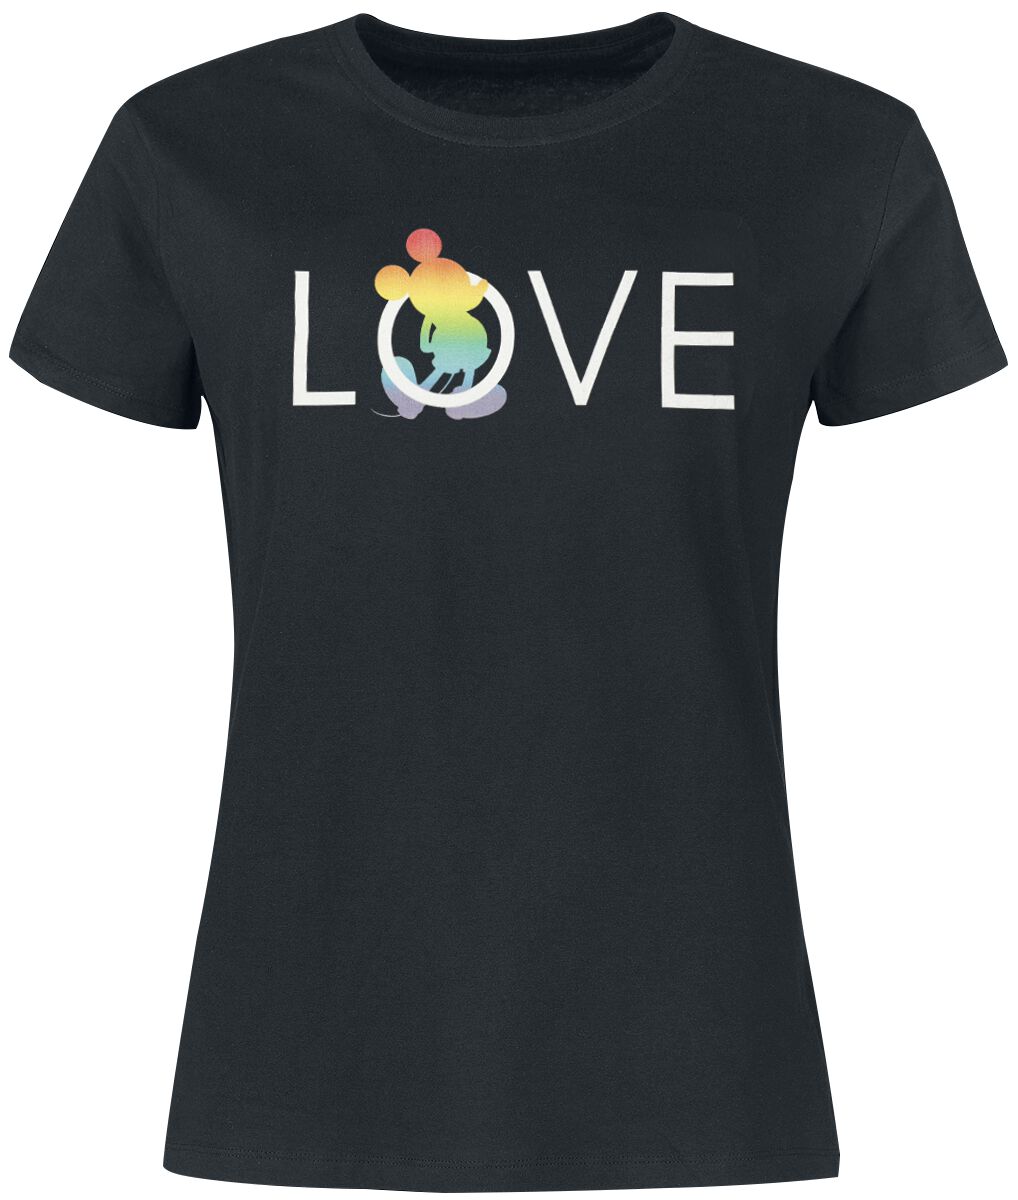 Mickey Mouse Love T-Shirt black